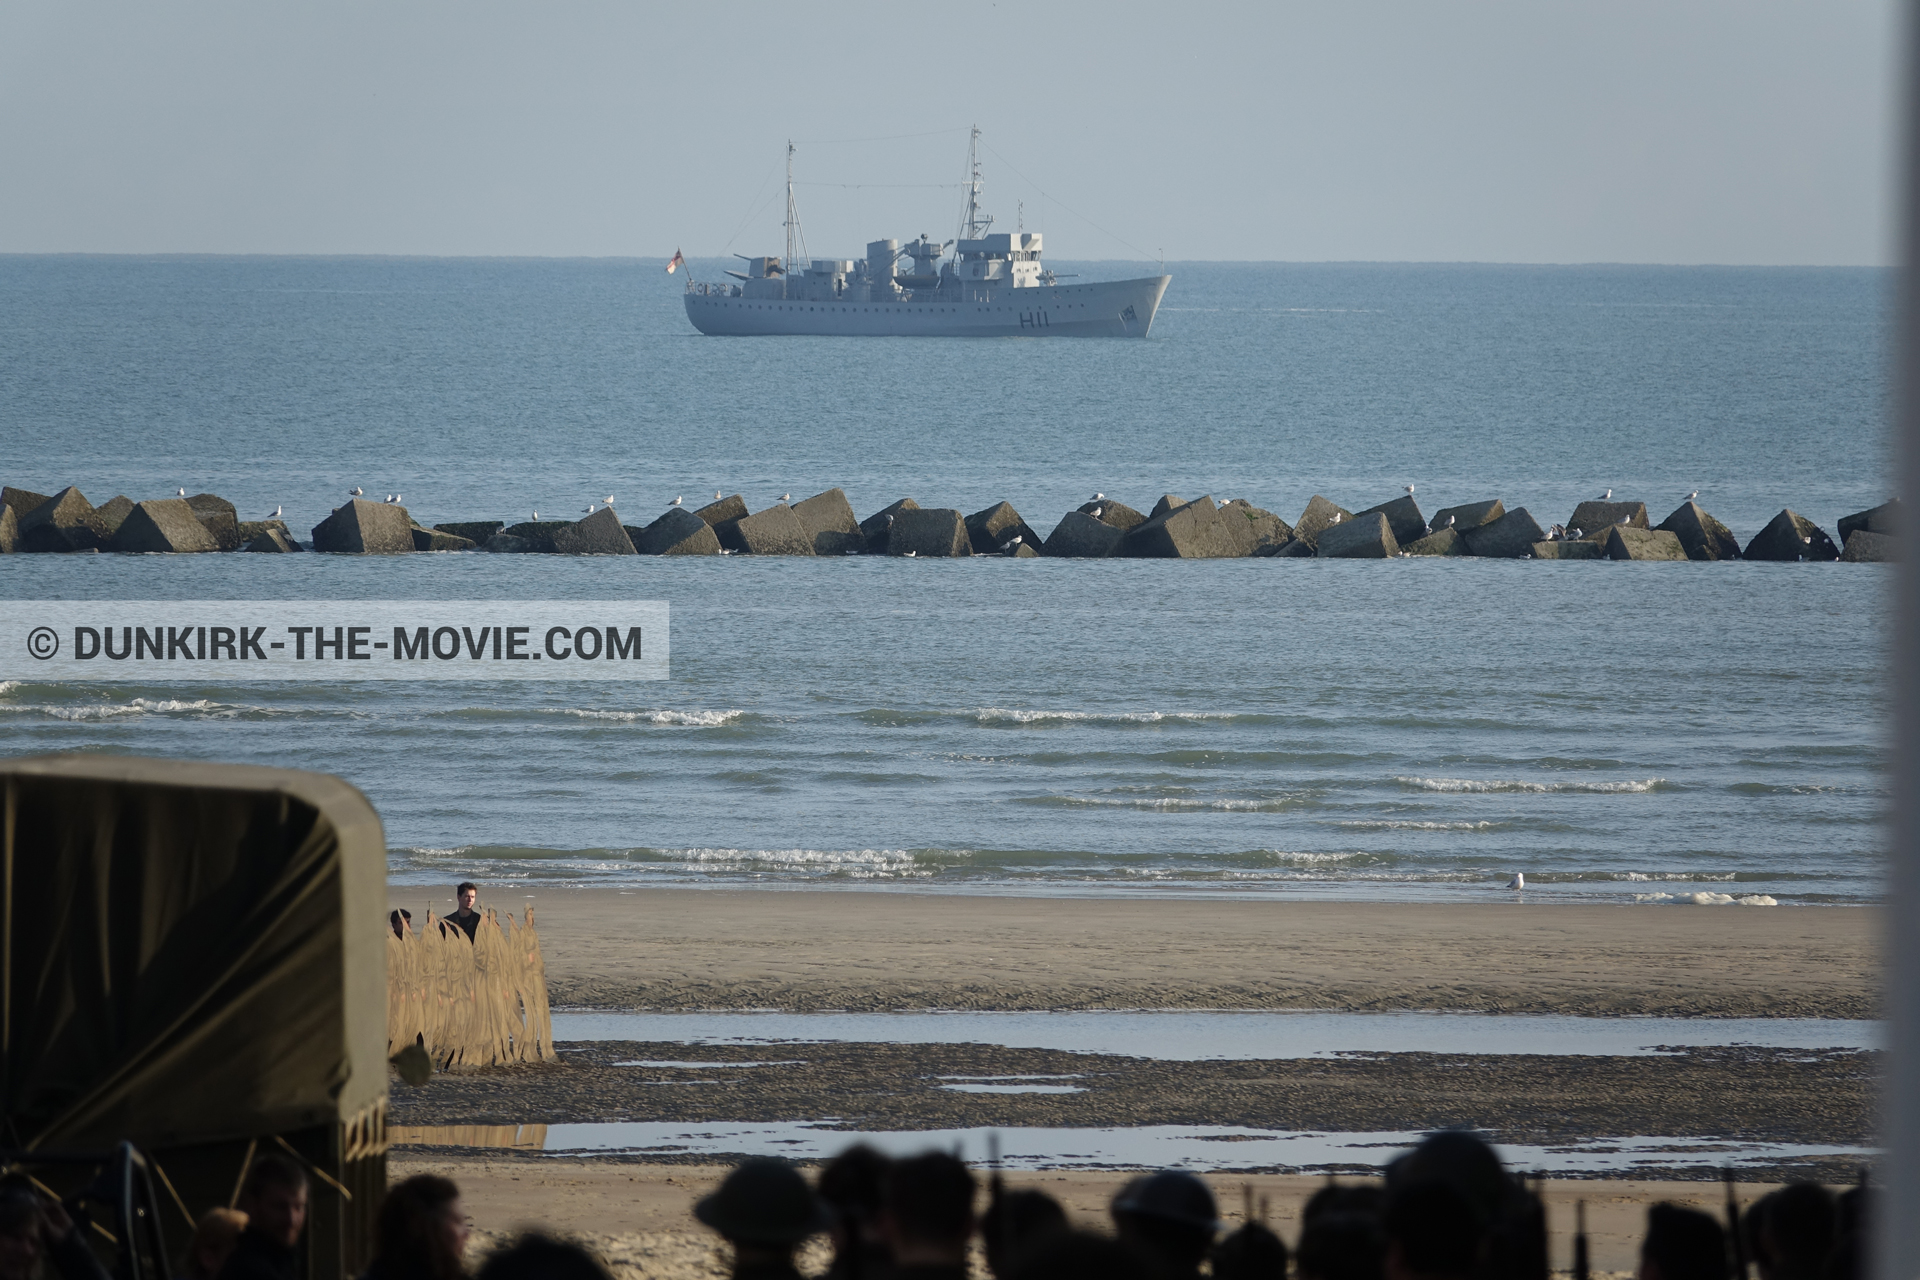 Picture with boat, truck, supernumeraries, H11 - MLV Castor, beach,  from behind the scene of the Dunkirk movie by Nolan